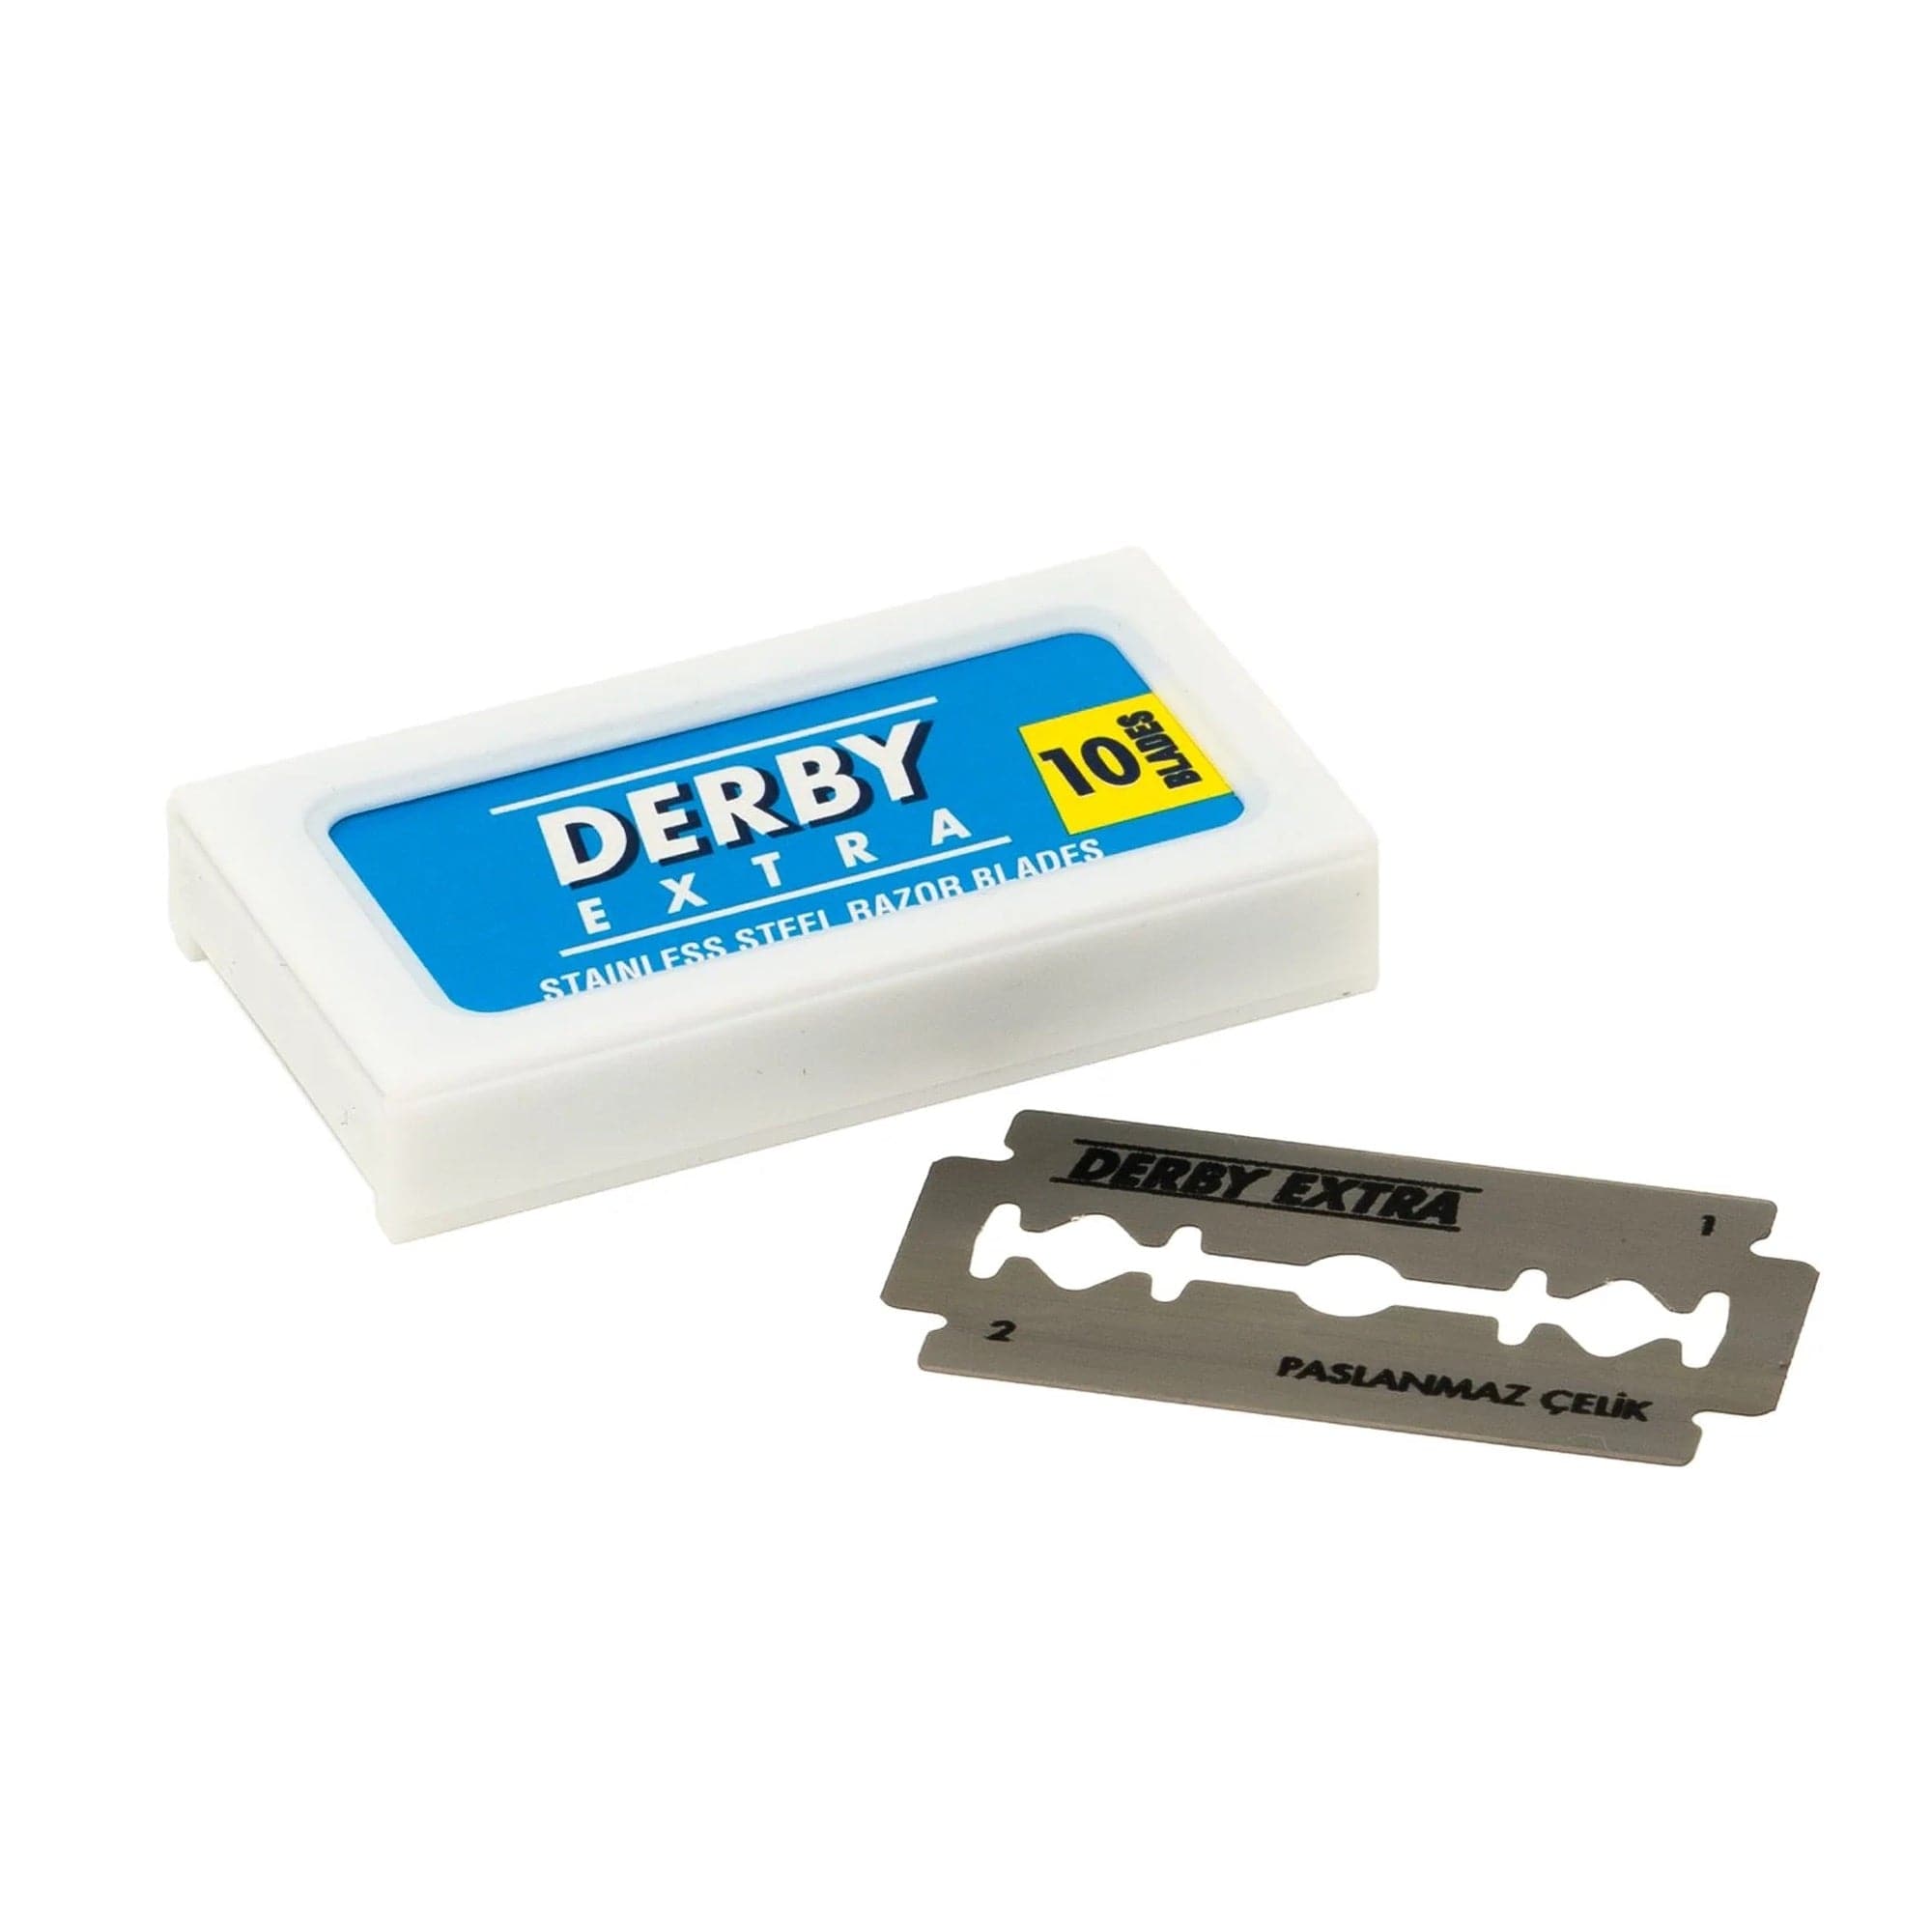 Derby - Extra Super Stainless Blades Bulk Pack (200pcs) - Eson Direct